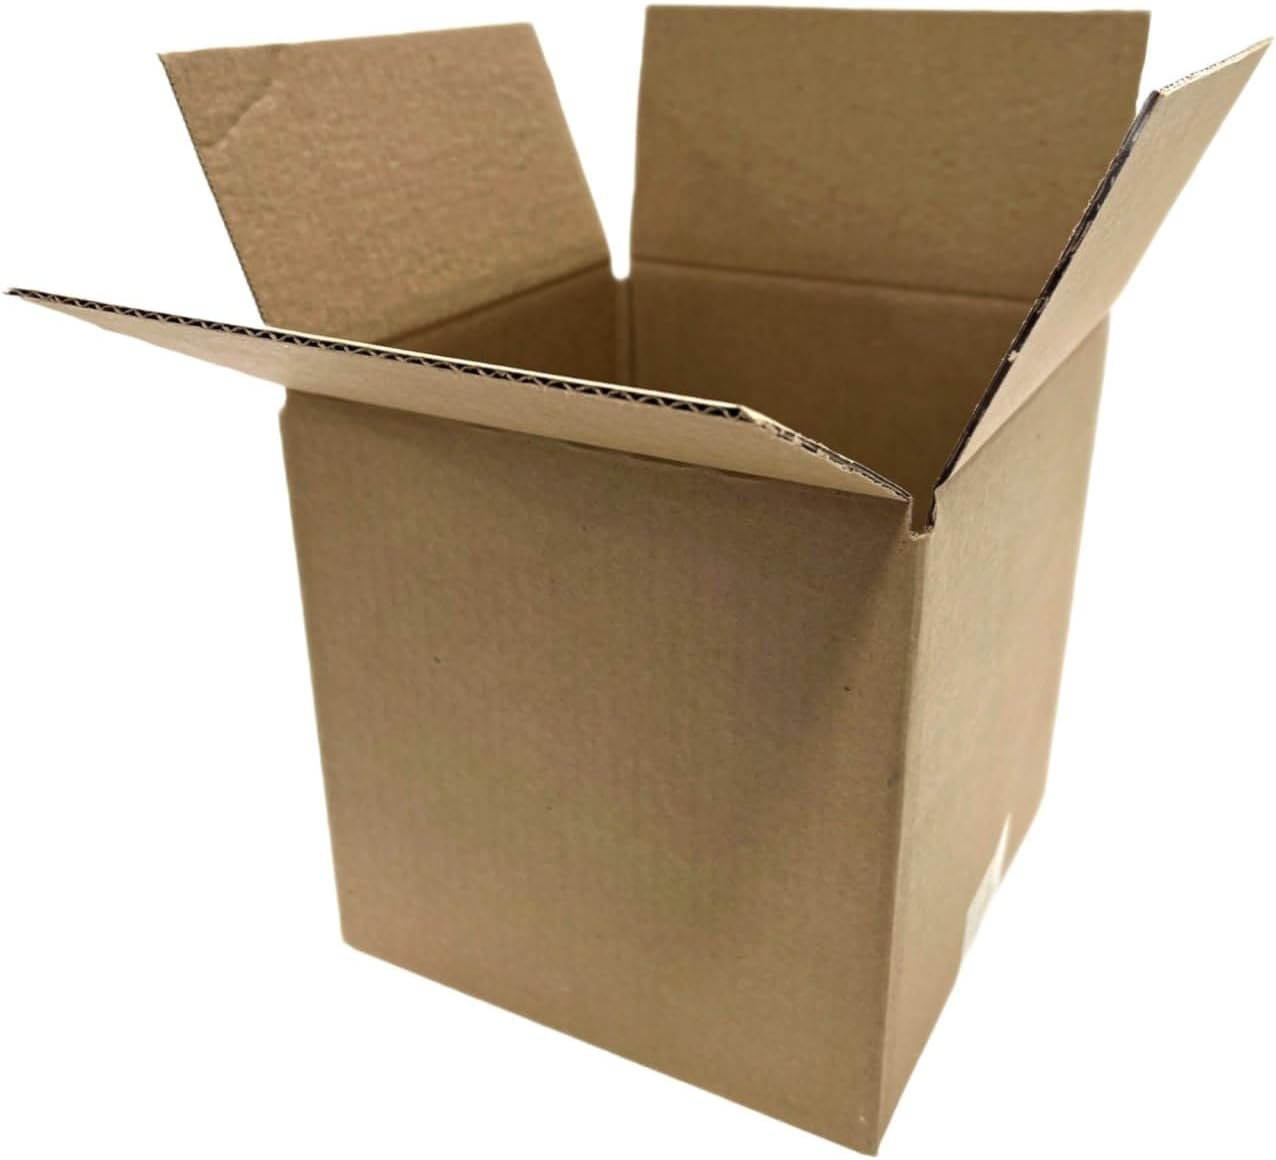 25 12x12x12 Cardboard Paper Boxes Mailing Packing Shipping Box Corrugated